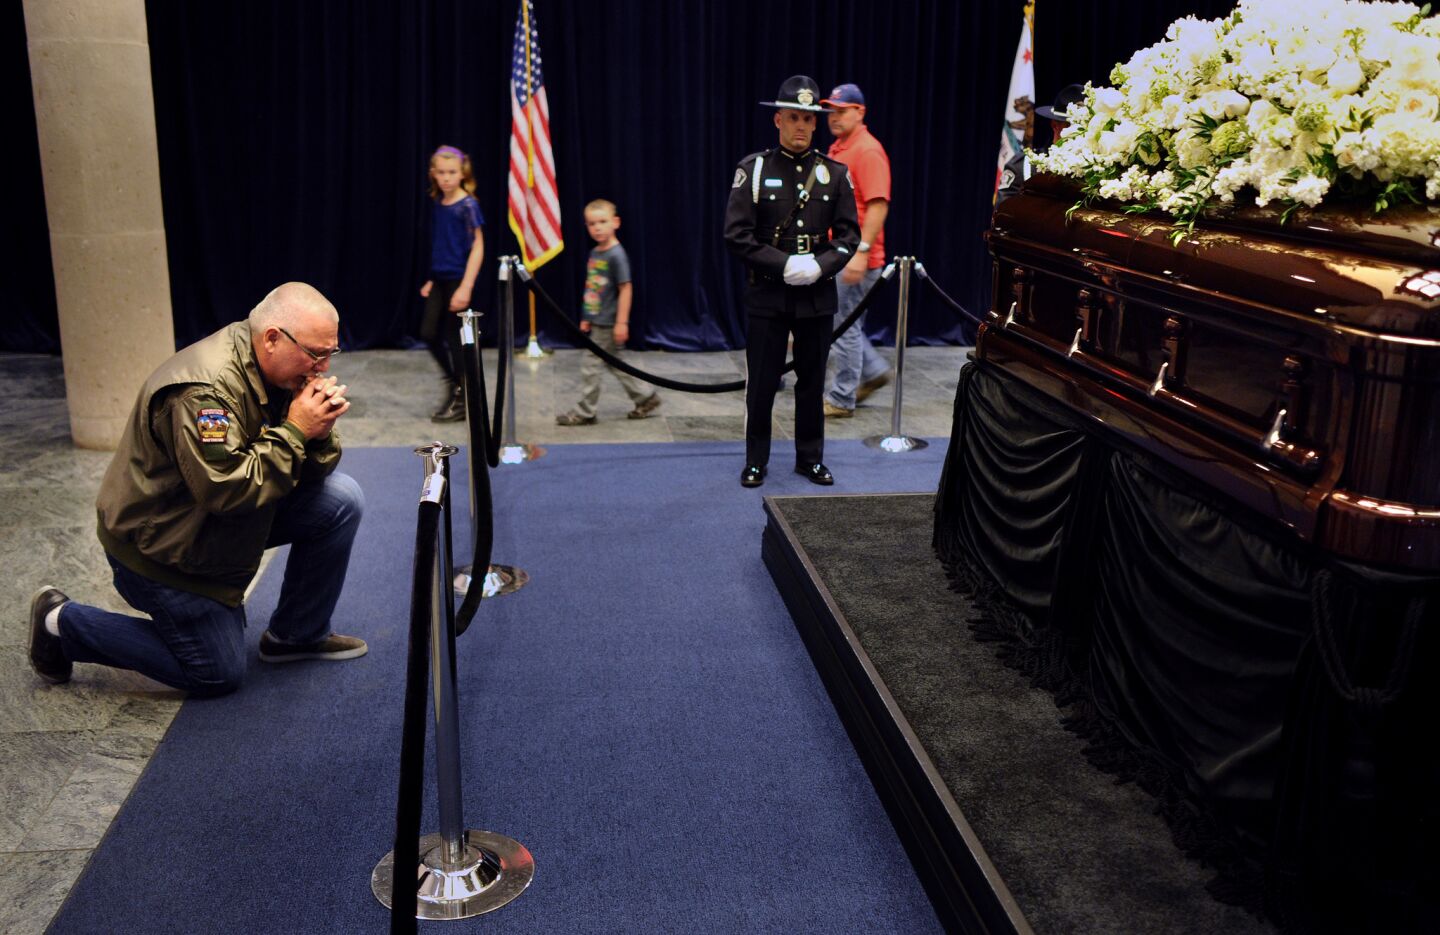 Steven Leslie prays in front of the casket of Nancy Reagan at the Reagan Presidential Library in Simi Valley.